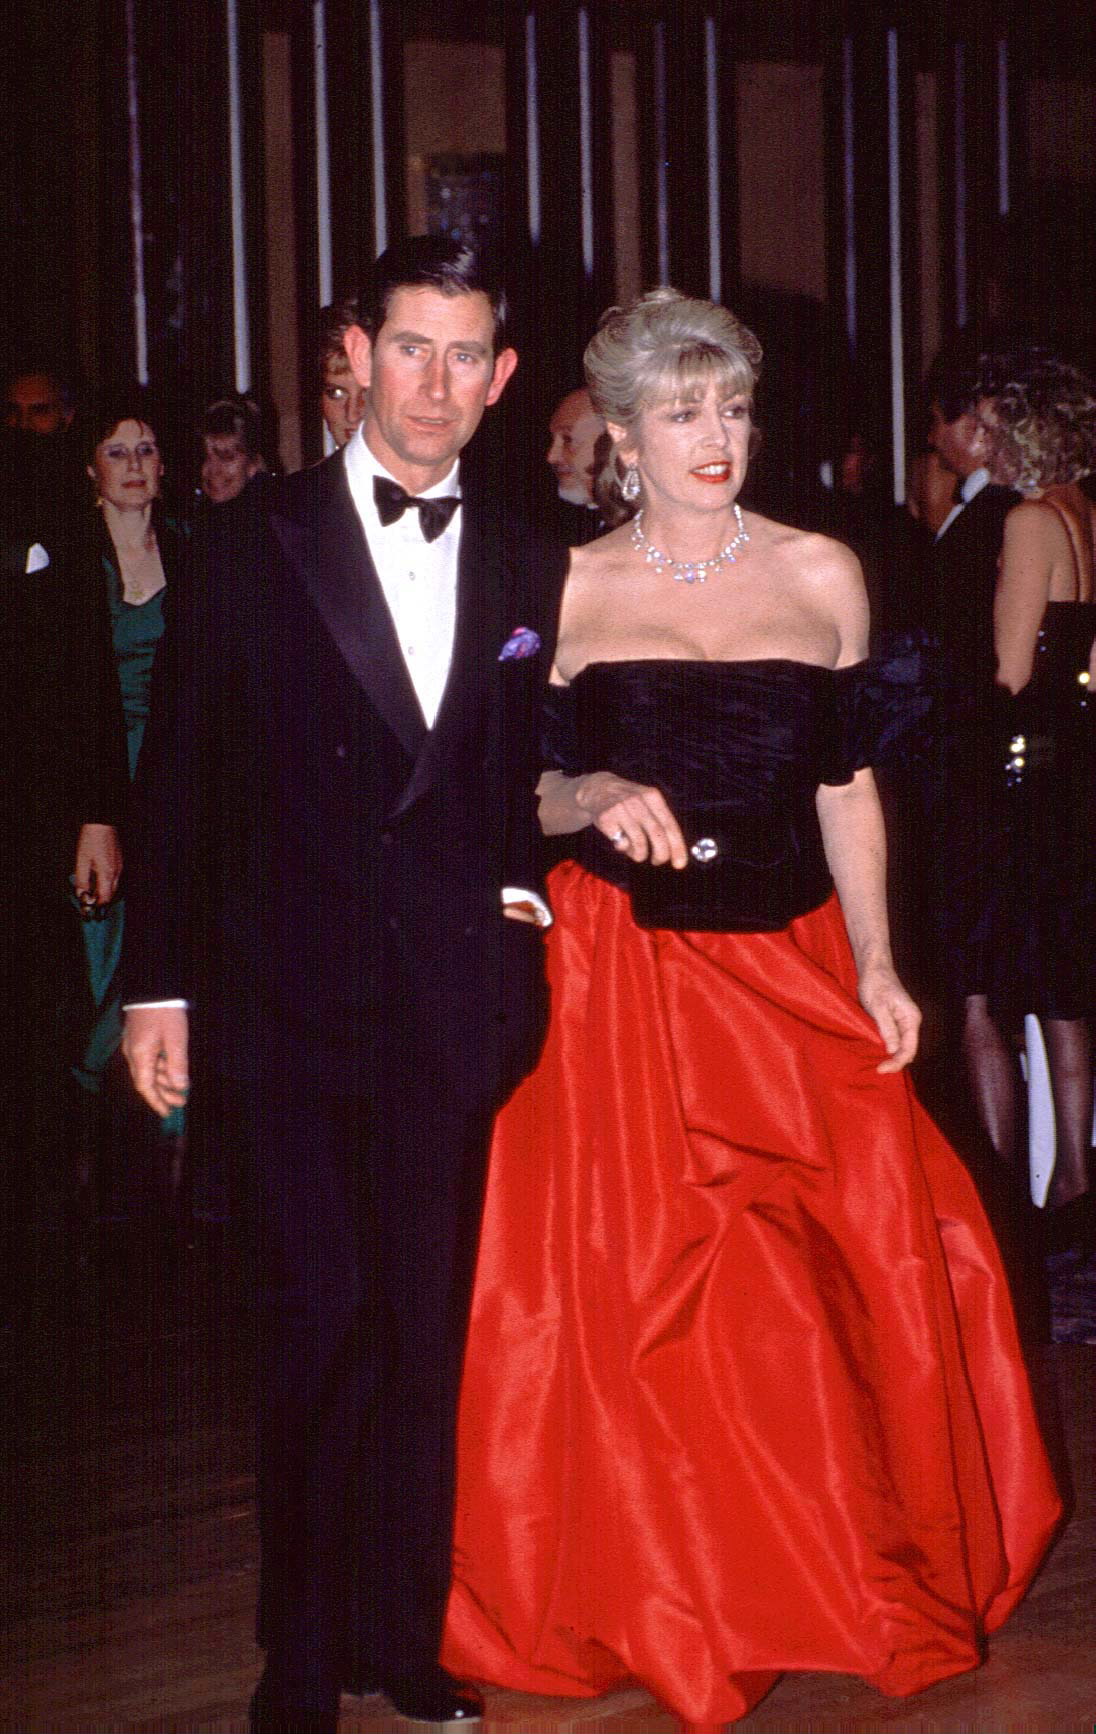 Prince Charles & Lady Dale Tryon (aka Kanga) at The Diamond Ball at The Royal Lancaster Hotel in aid of the charity ' Sane ' | Source: Getty Images